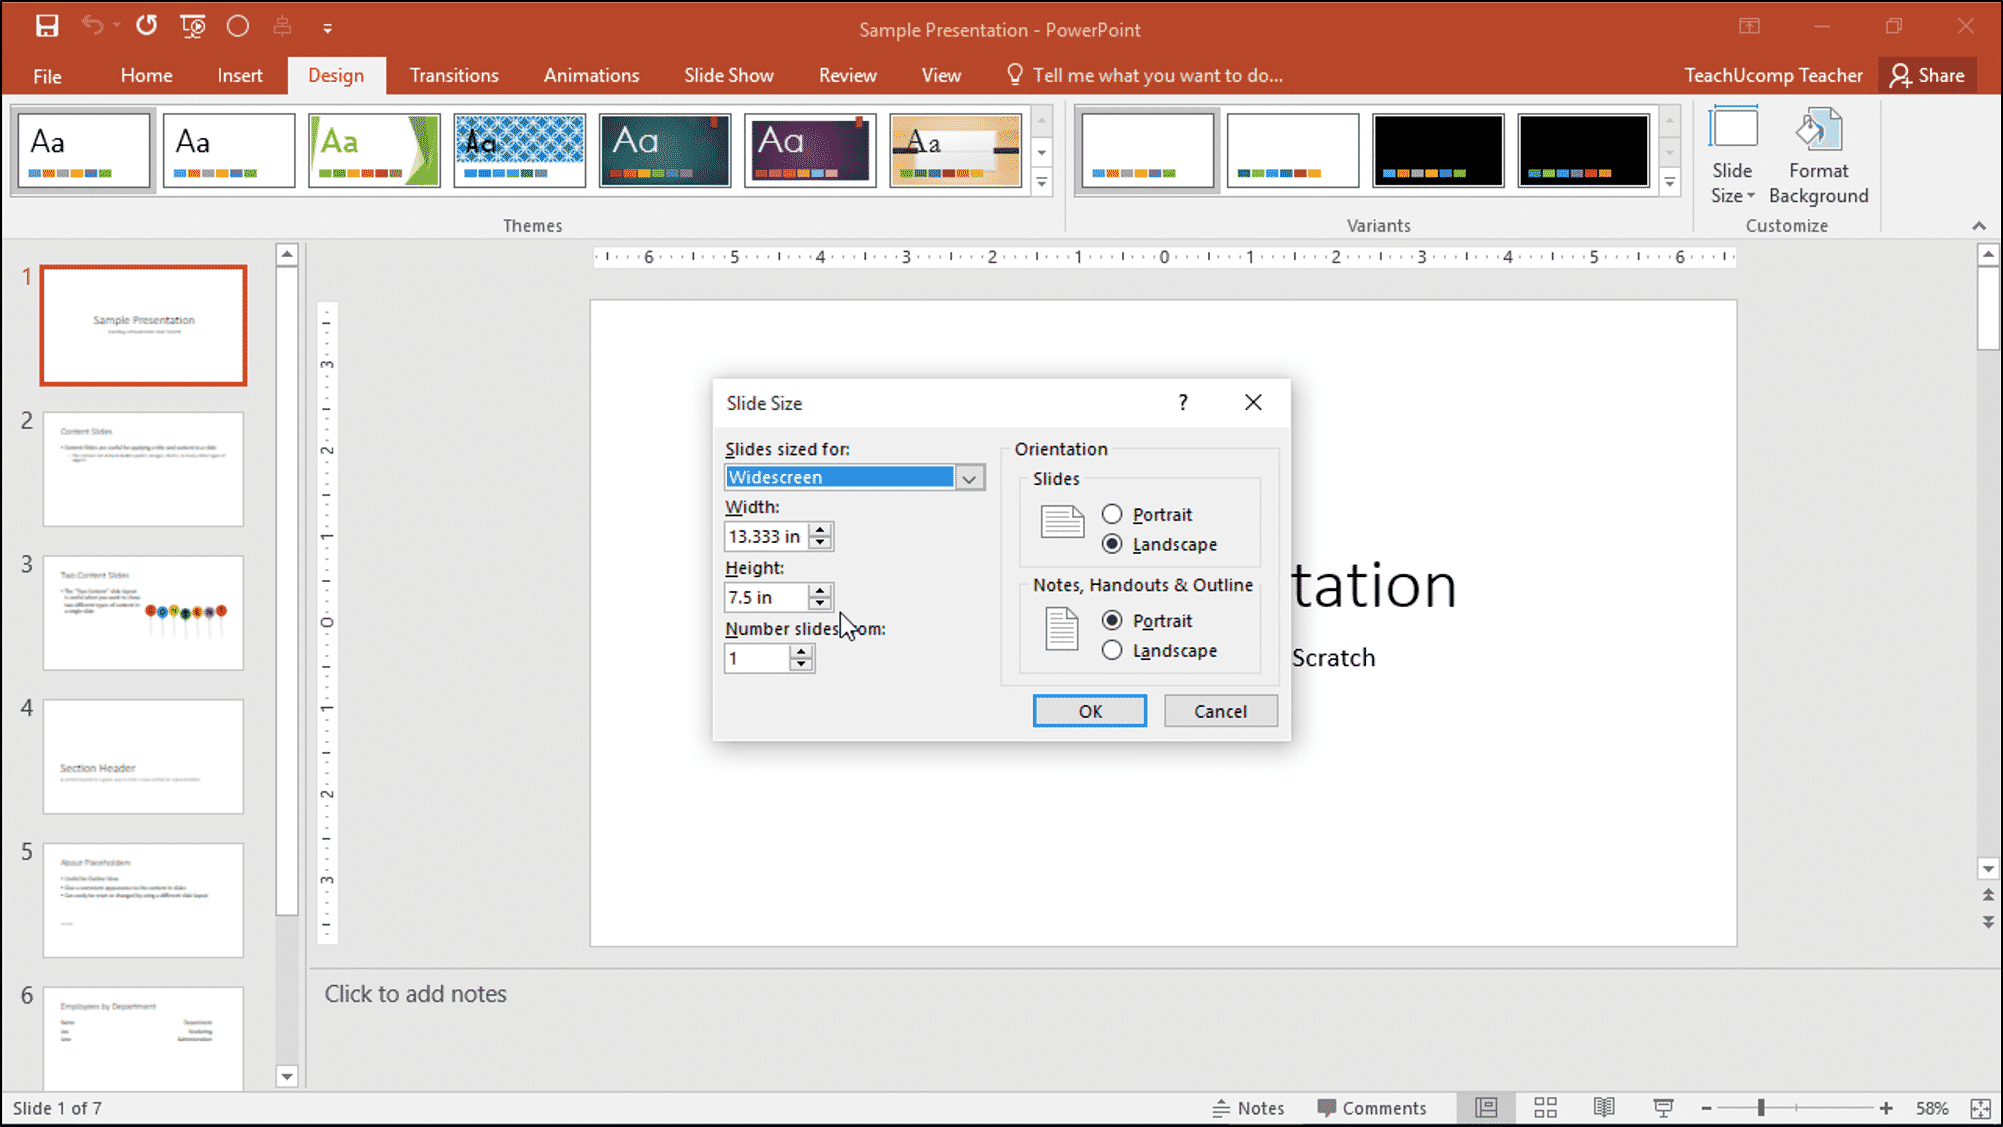 How To Change Aspect Ratio In Powerpoint?